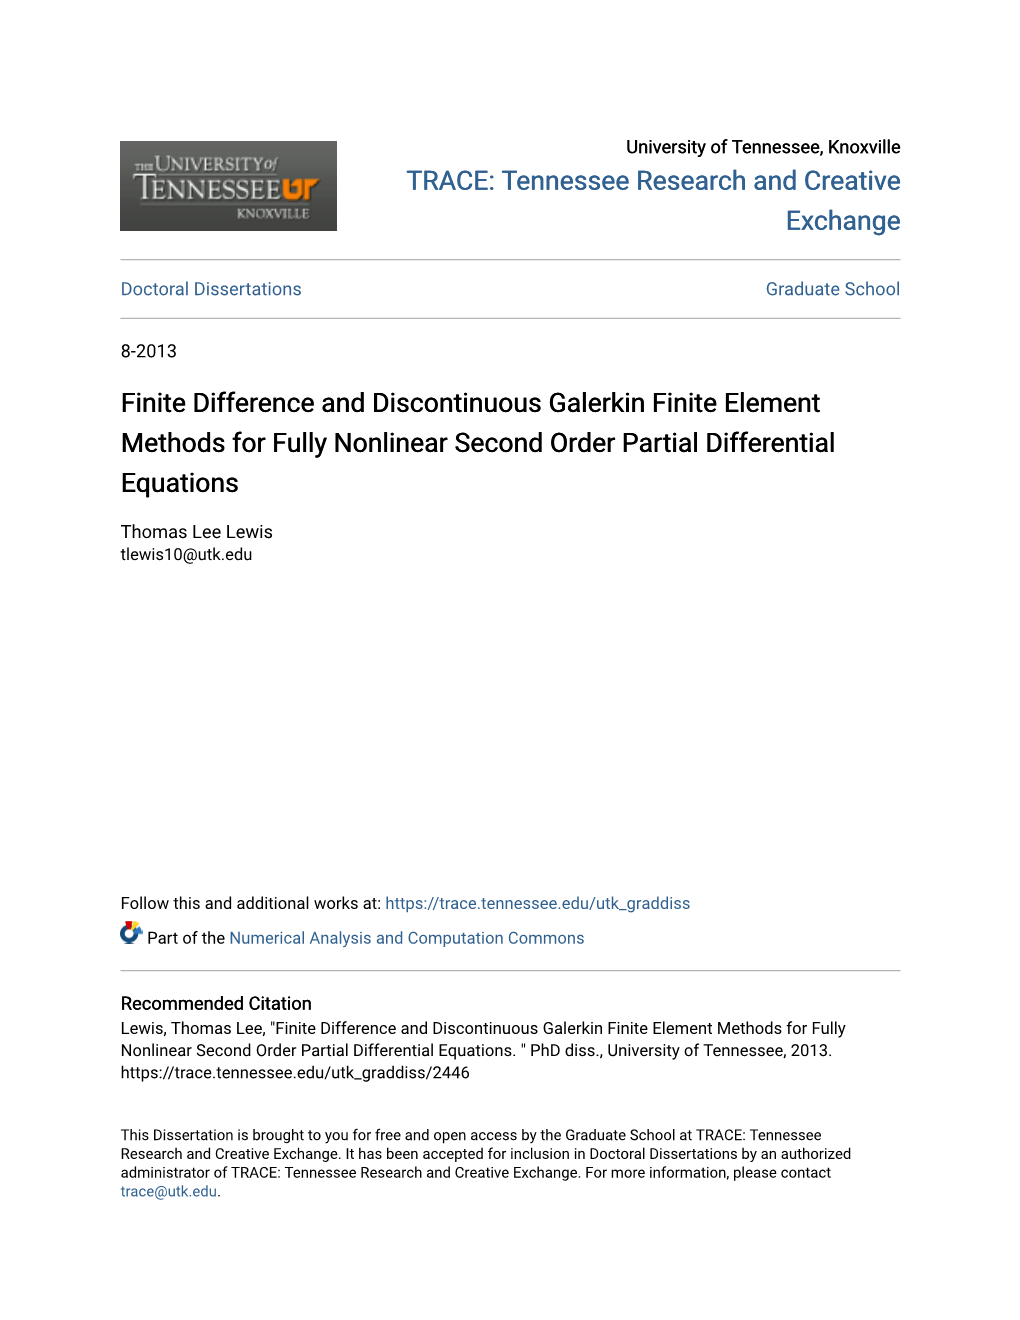 Finite Difference and Discontinuous Galerkin Finite Element Methods for Fully Nonlinear Second Order Partial Differential Equations